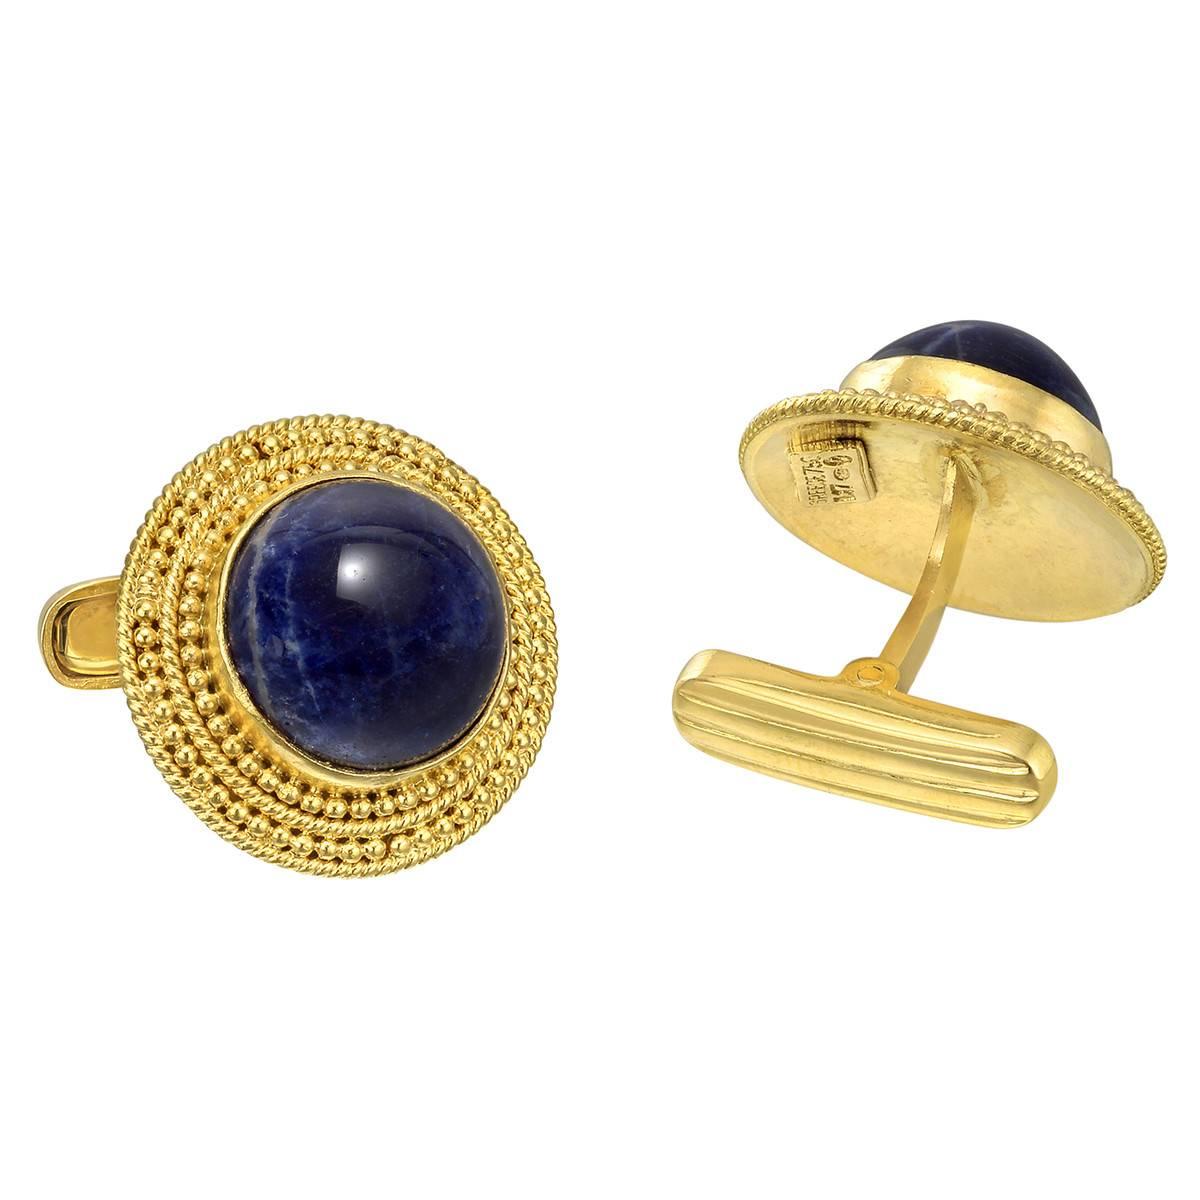 Lalaounis Yellow Gold and Sodalite Cufflinks